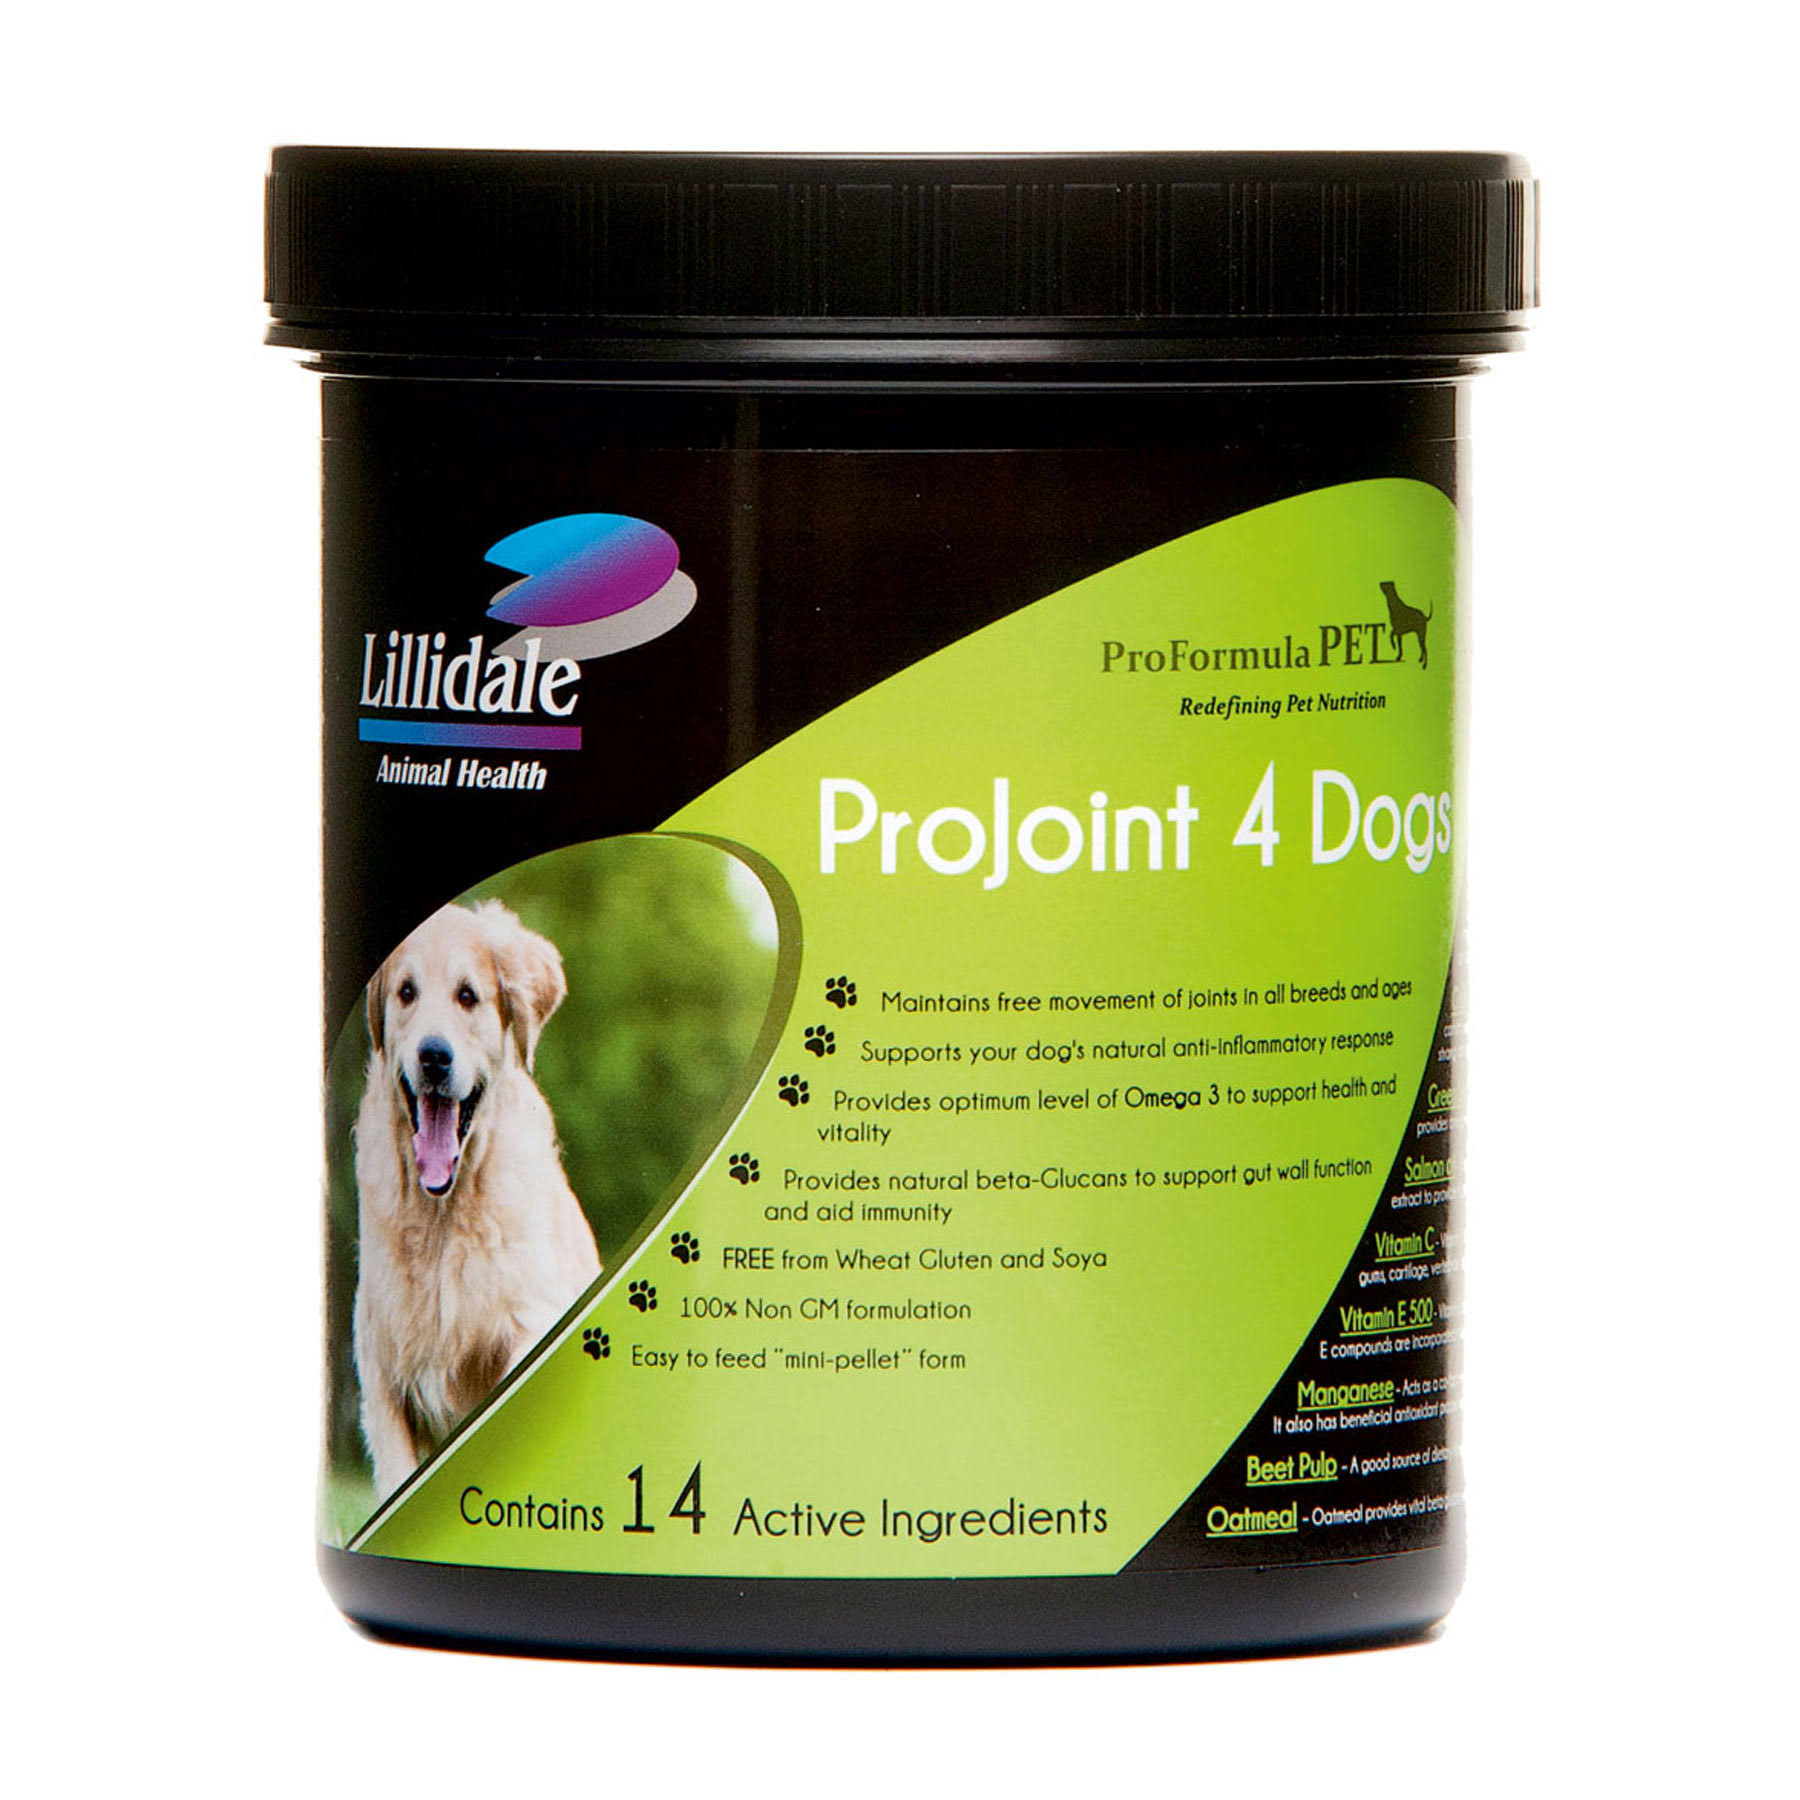 Lillidale Projoint 4 Dogs Supplement - 500g, One Colour